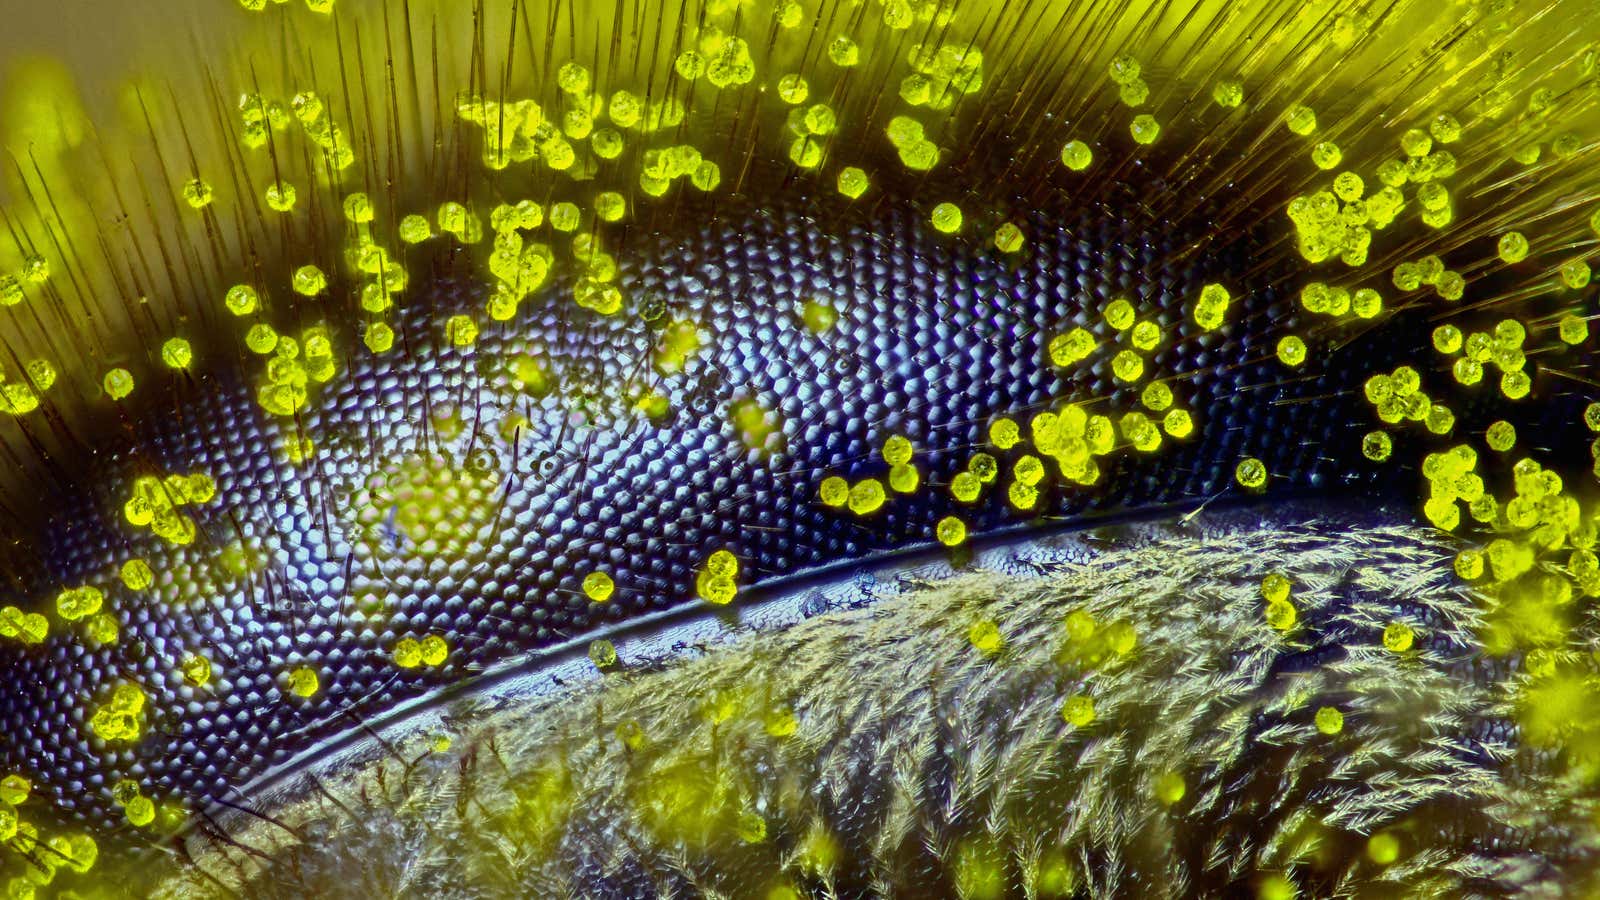 Eye of a honey bee (Apis mellifera) covered in dandelion pollen, magnified 120x.